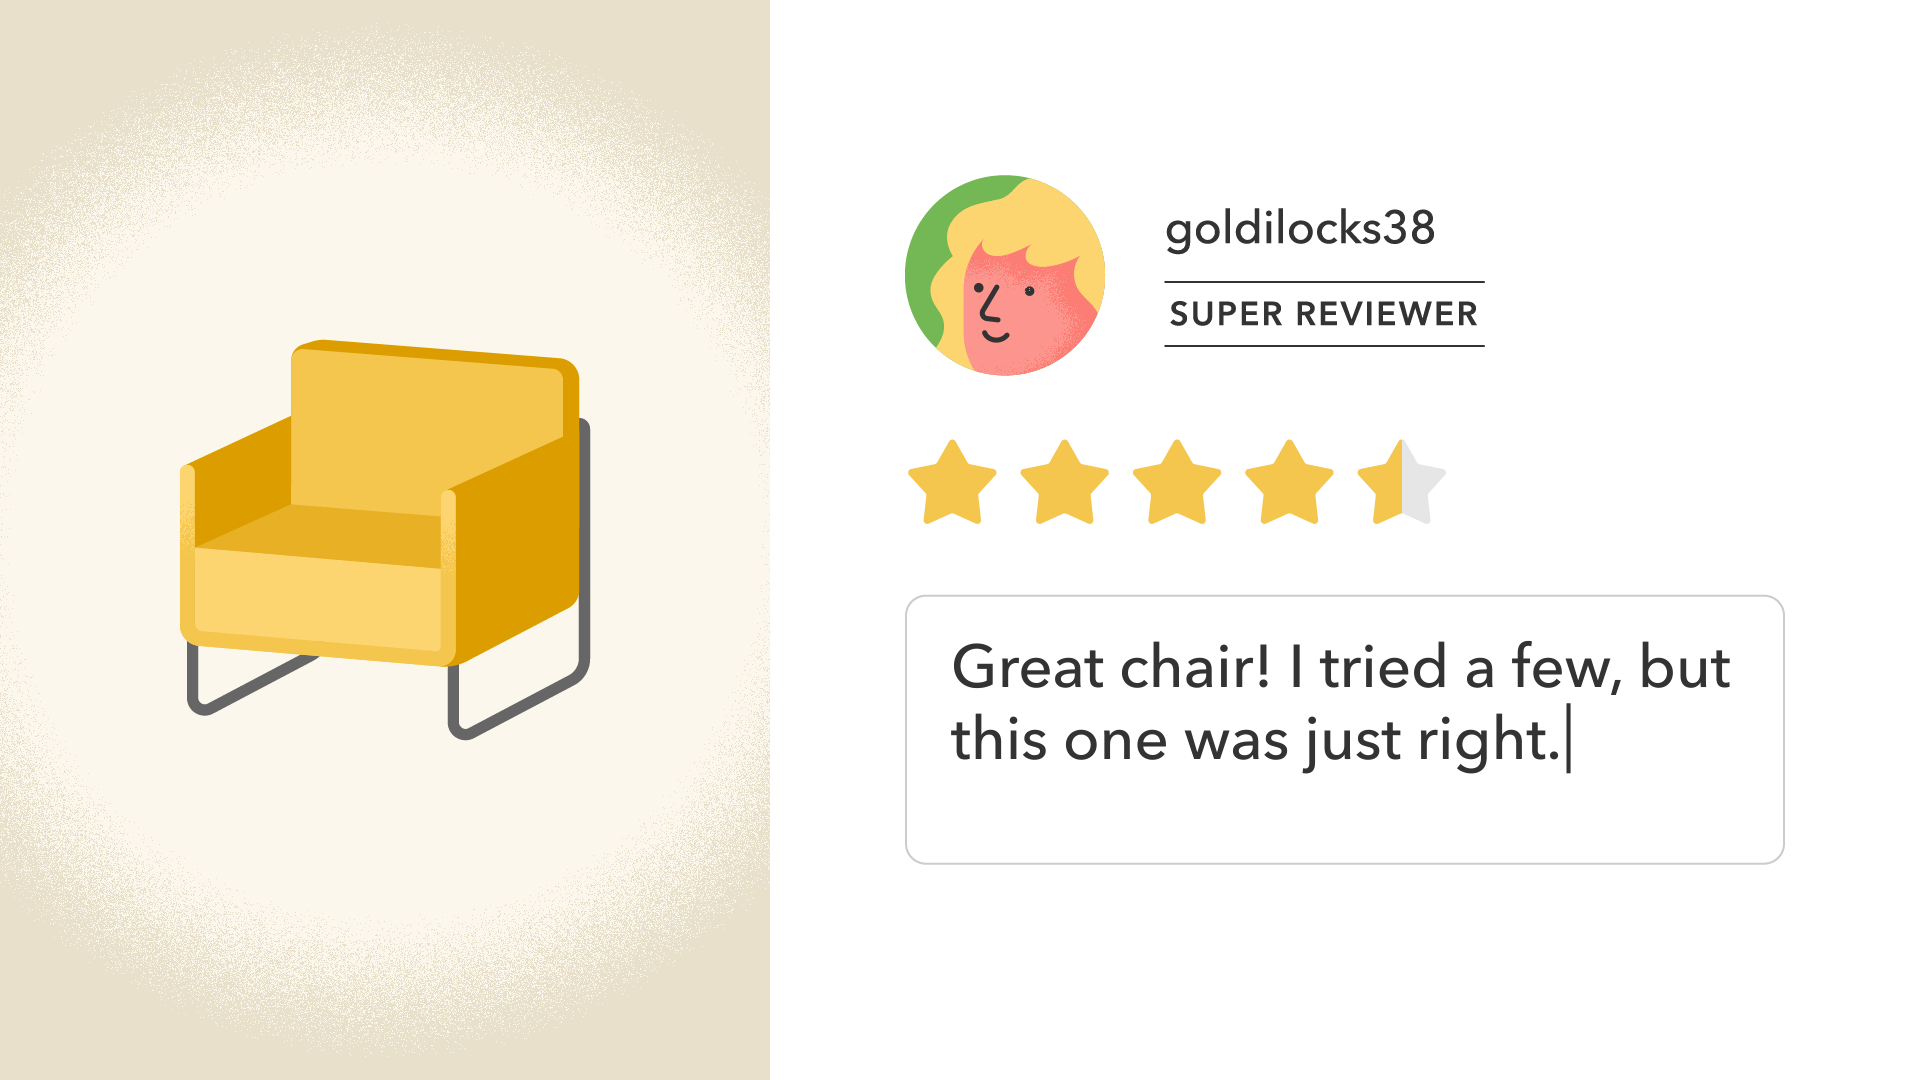 online review: "Great chair! I tried a few, but this one was just right."